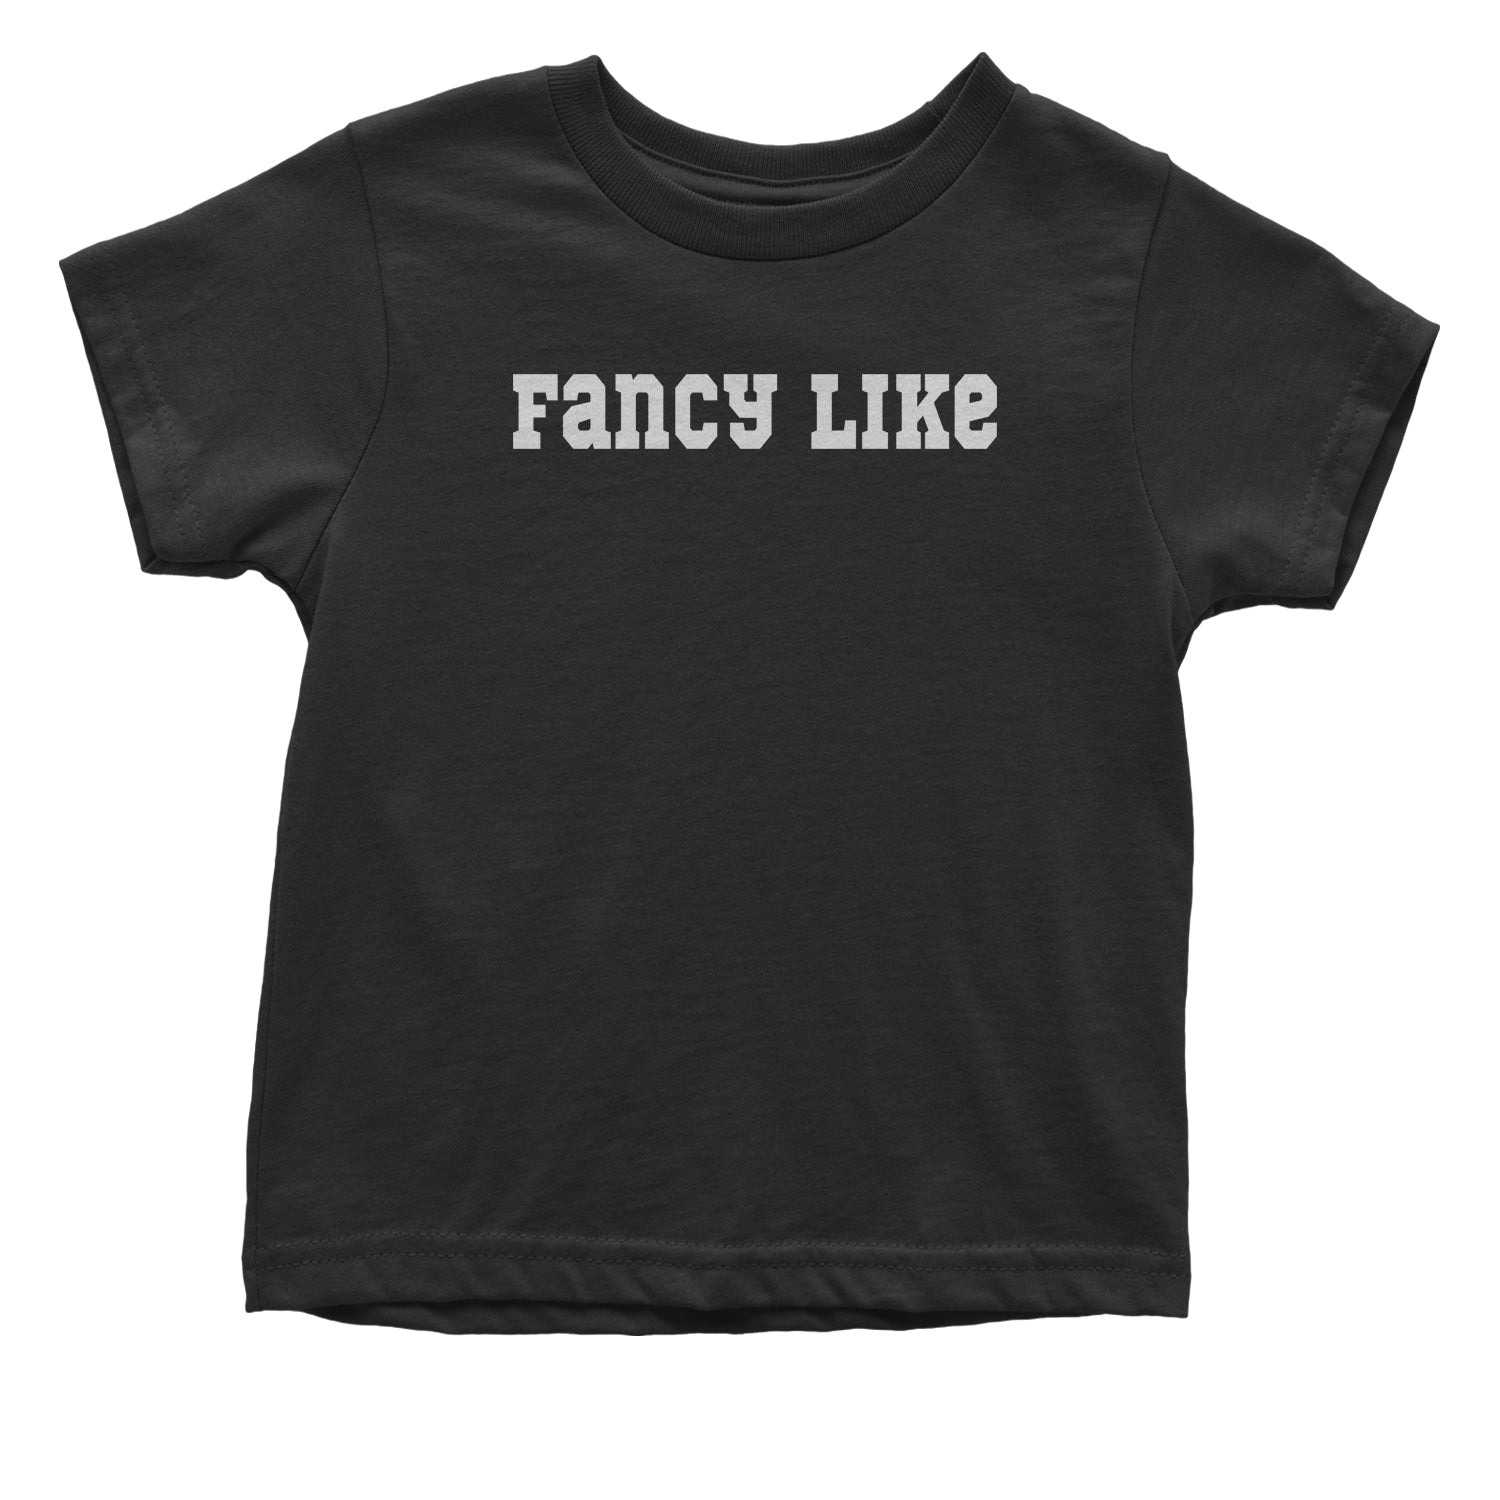 Fancy Like Toddler T-Shirt hayes, walter by Expression Tees